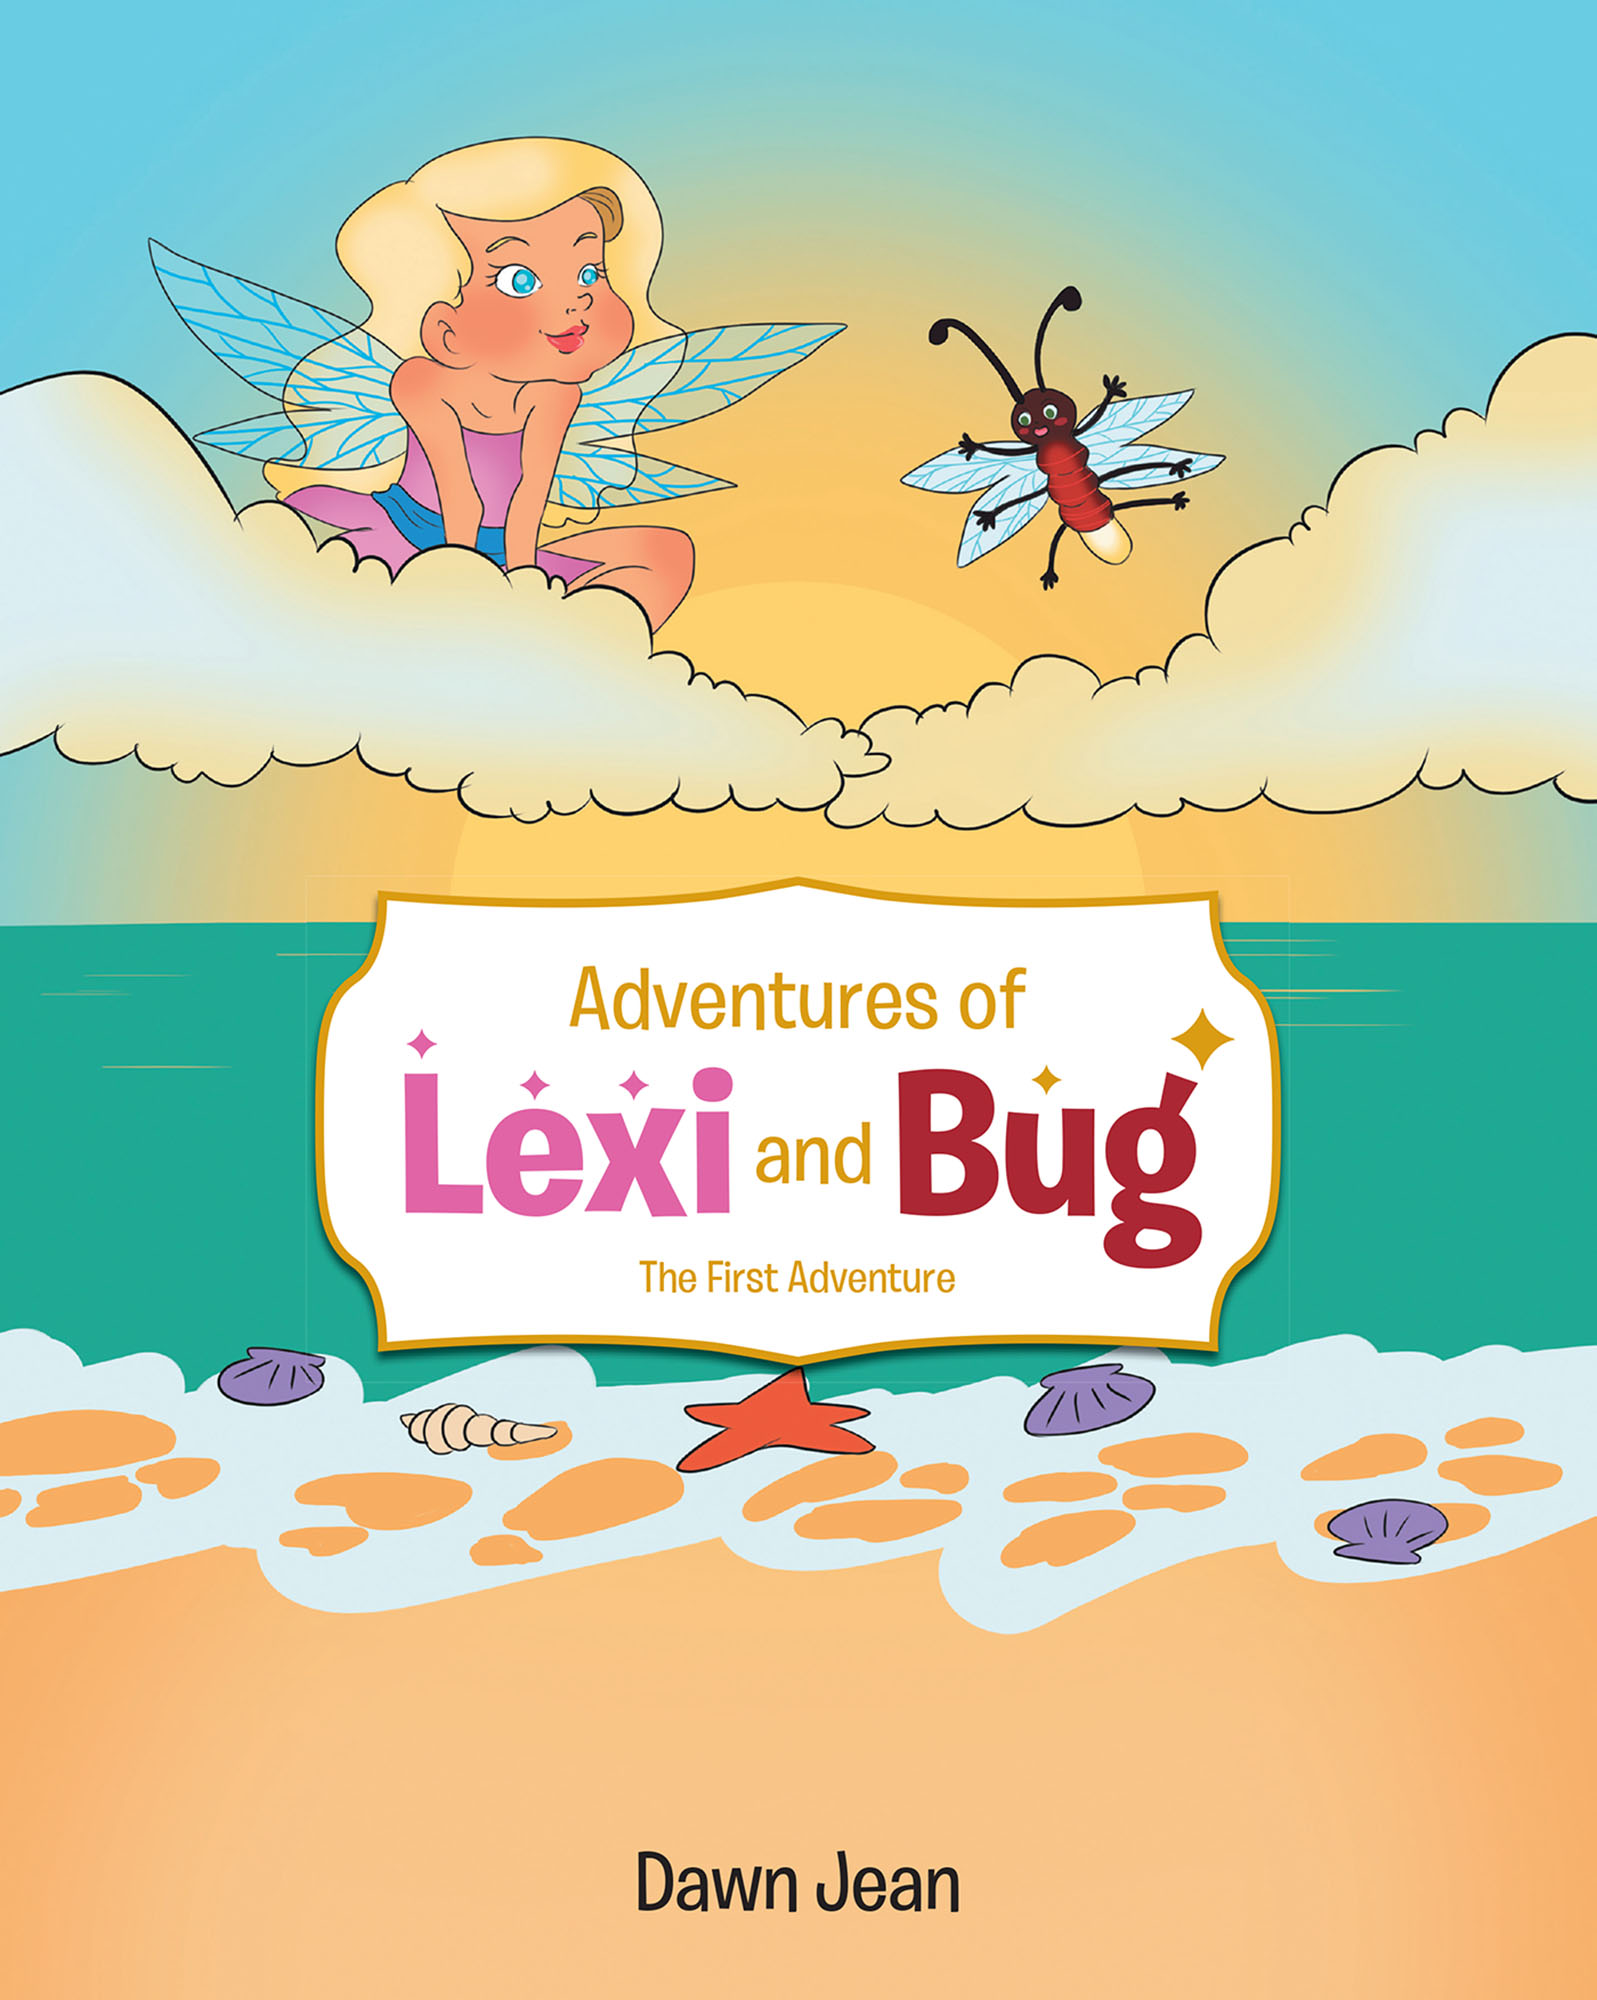 Book Adventures of Lexi and Bug